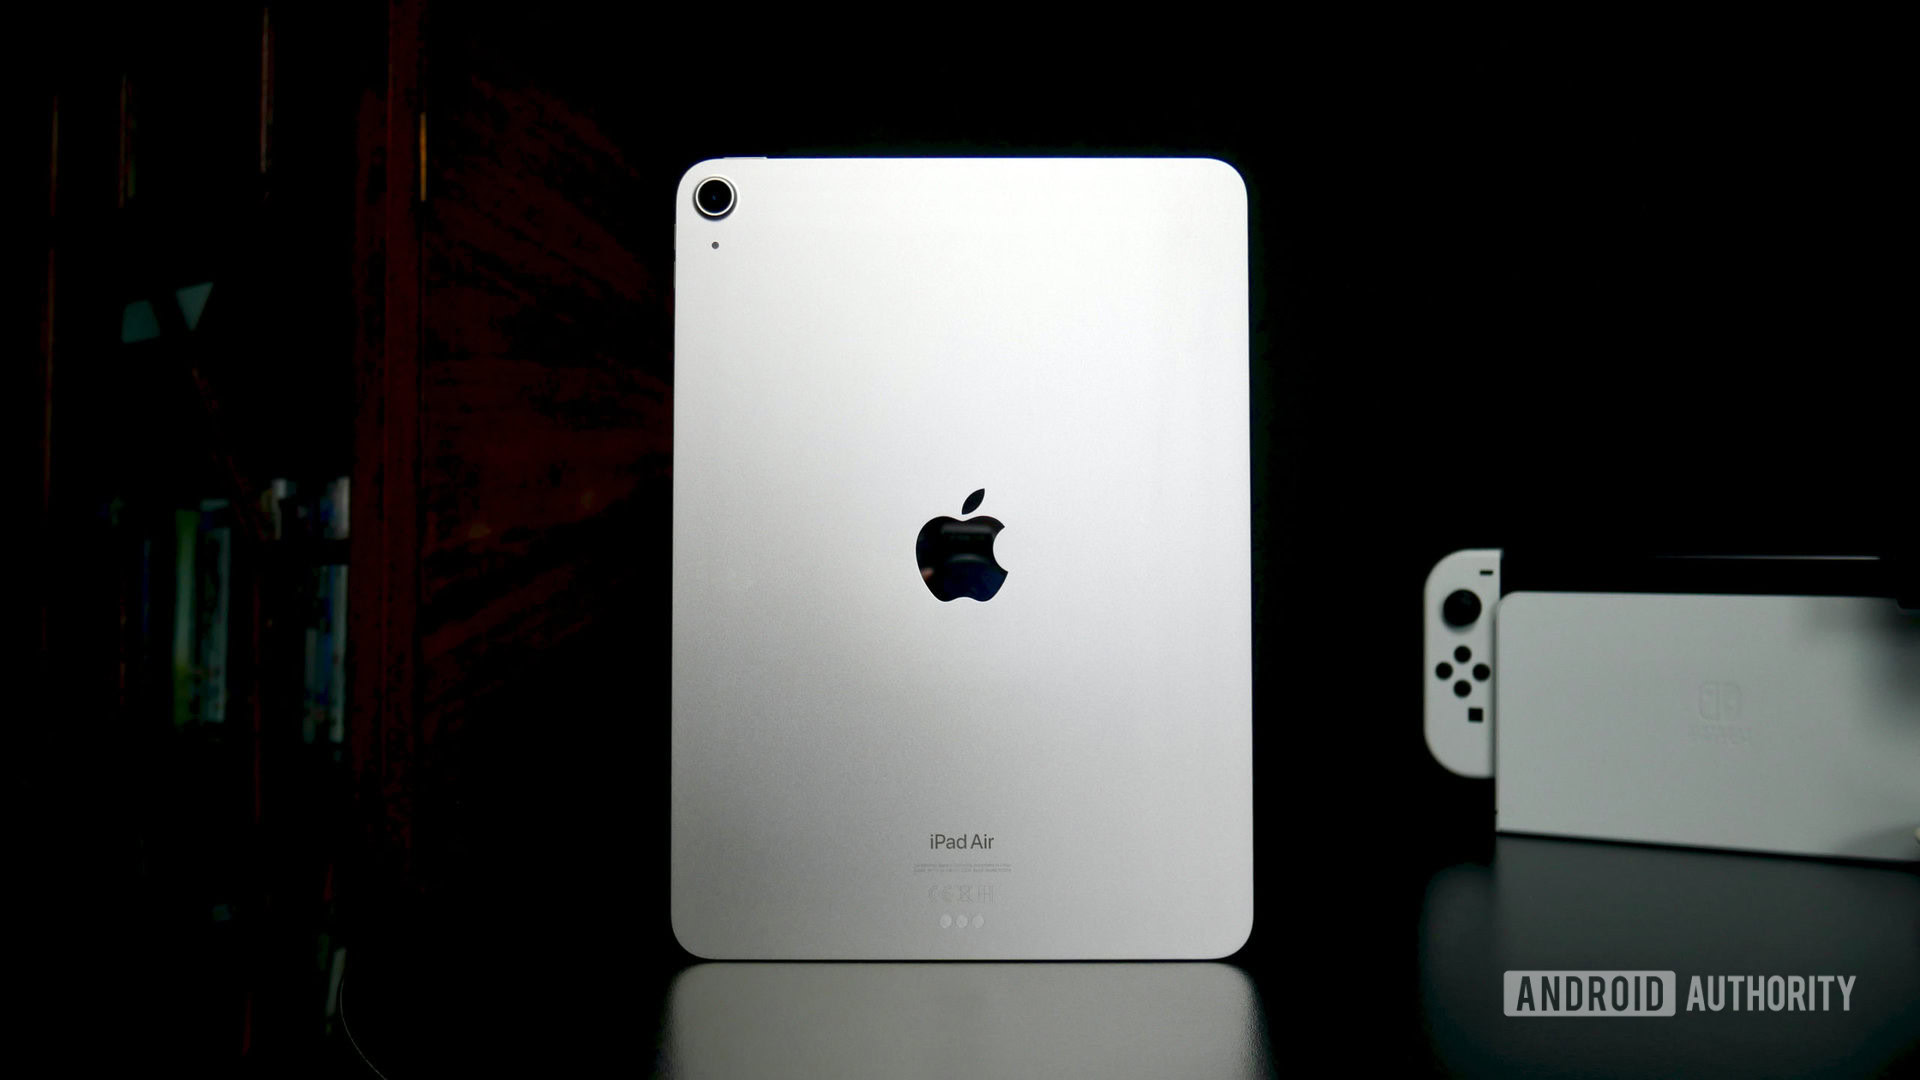 Apple iPad Air (5th generation) review: Mild upgrades, still uncontested